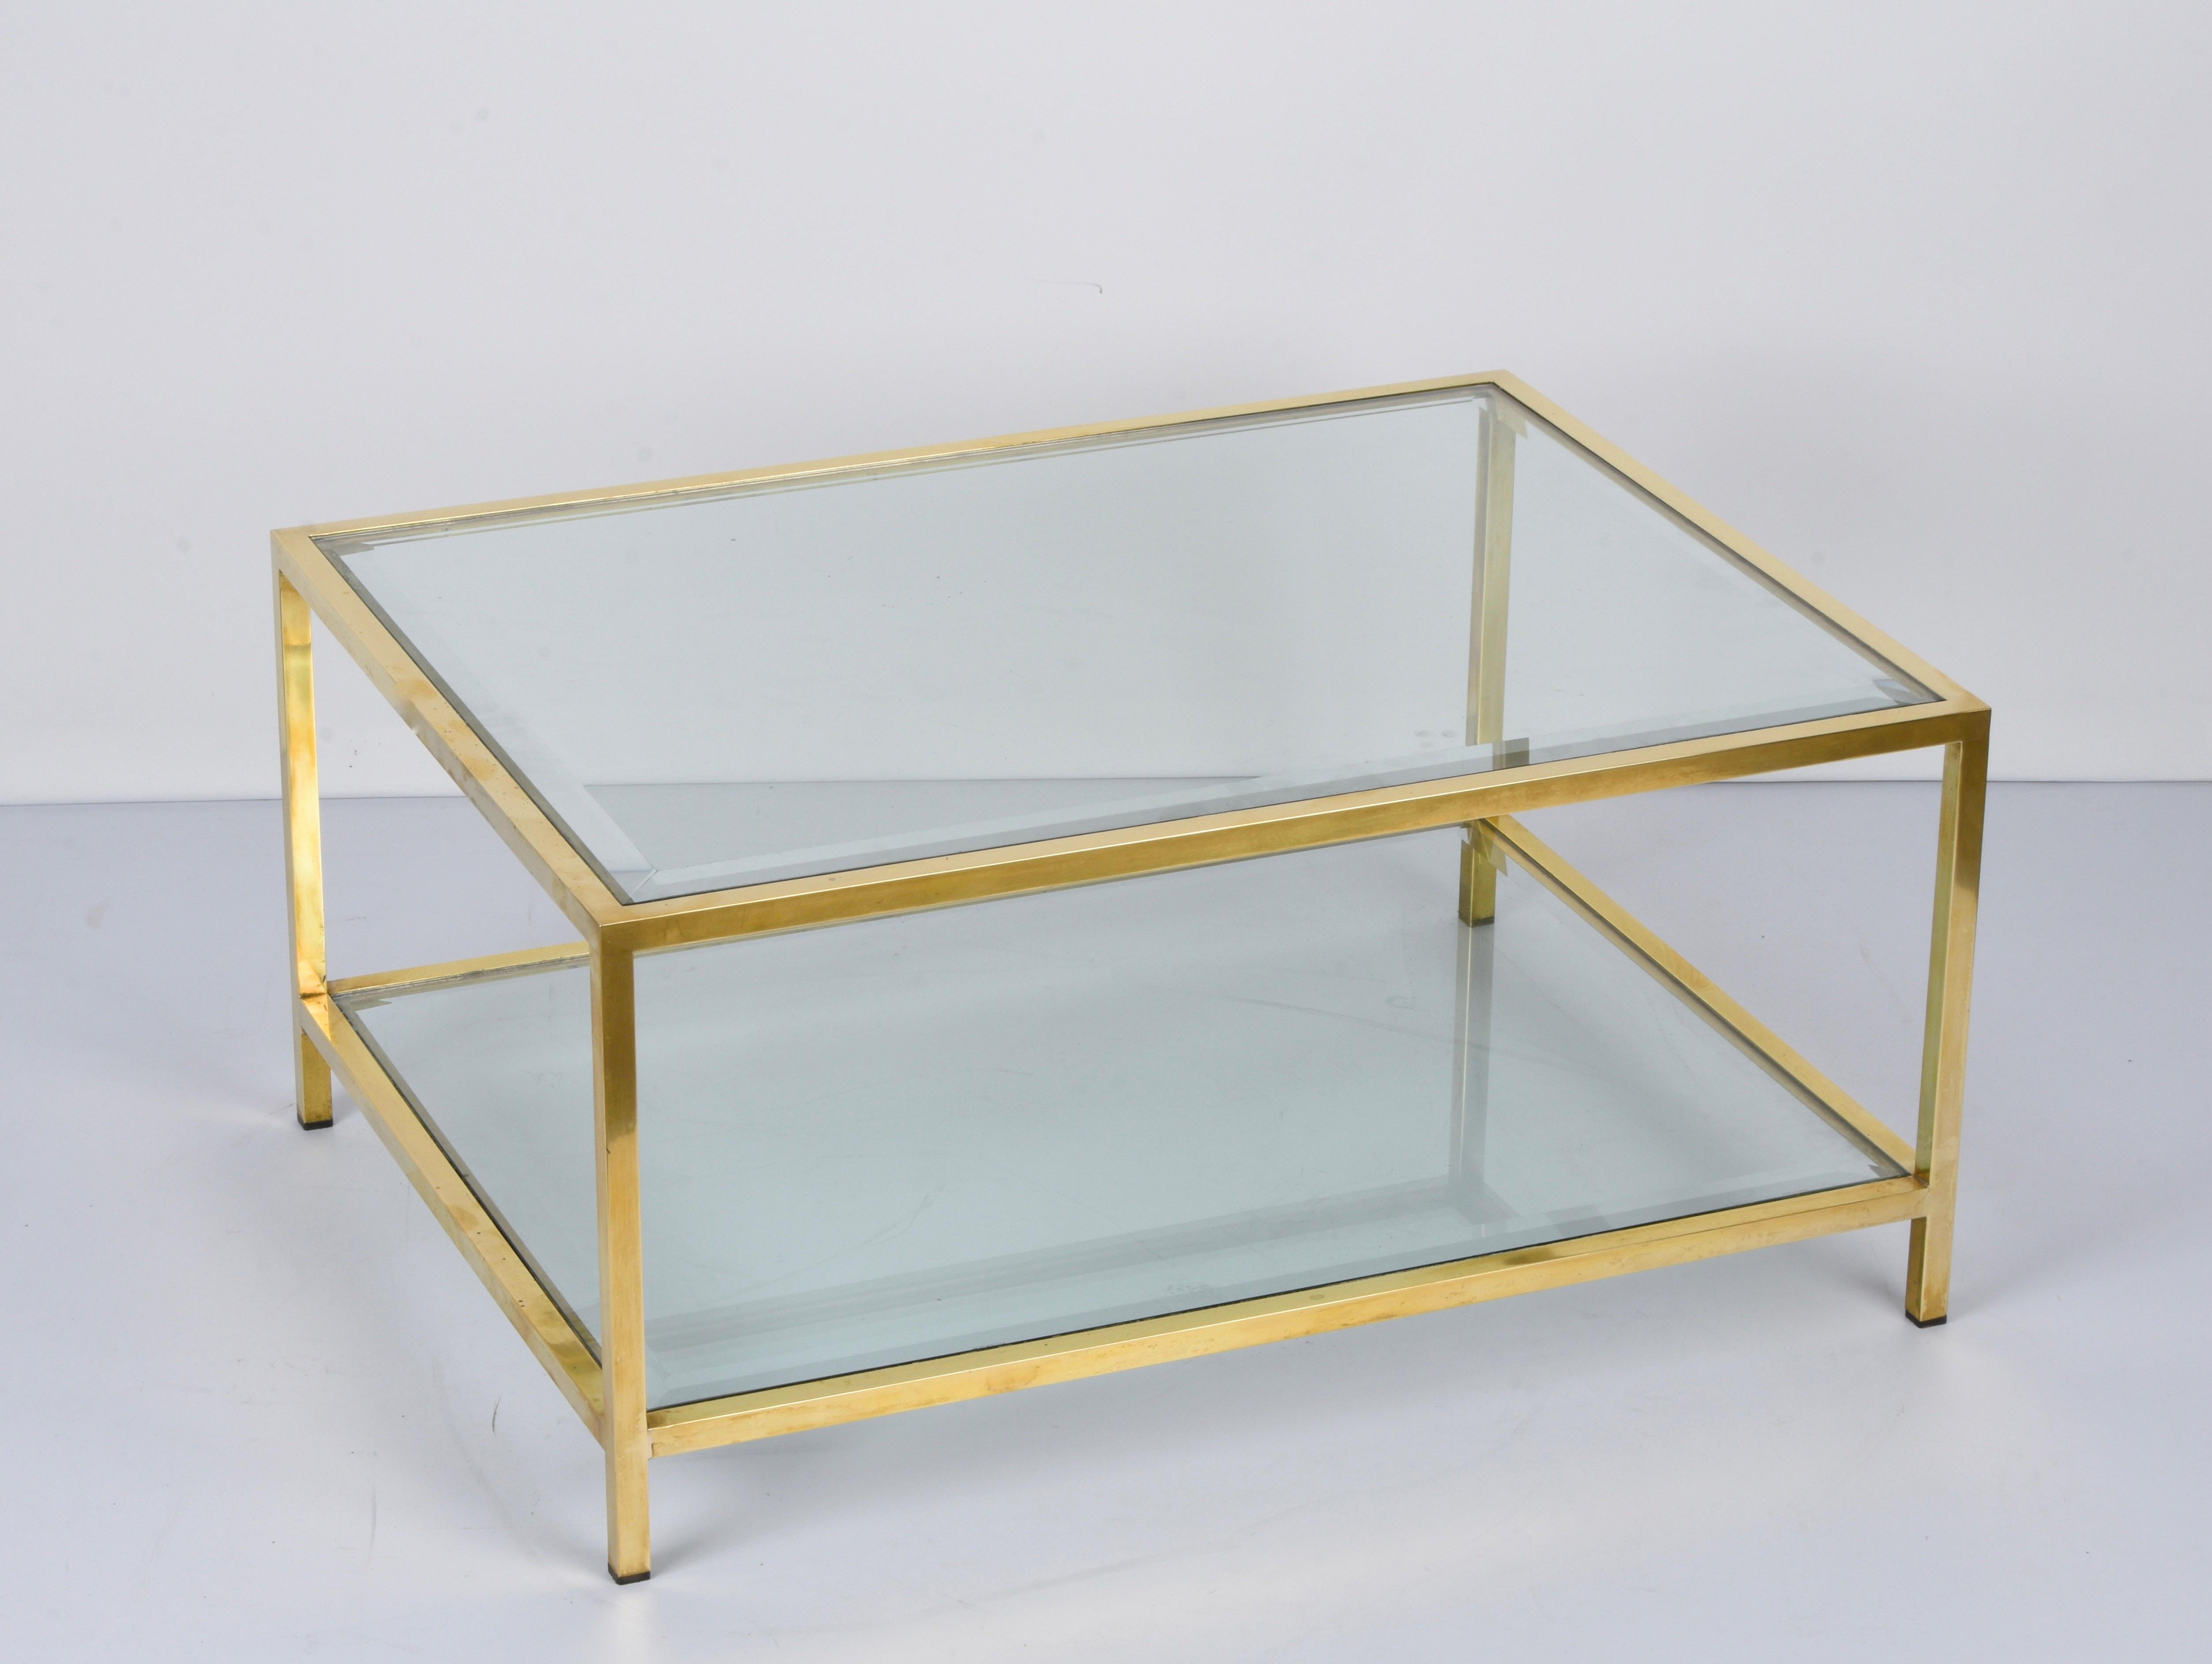 MidCentury Brass and Glass Italian Double-Tiered Rectangular Coffee Table, 1970s For Sale 3